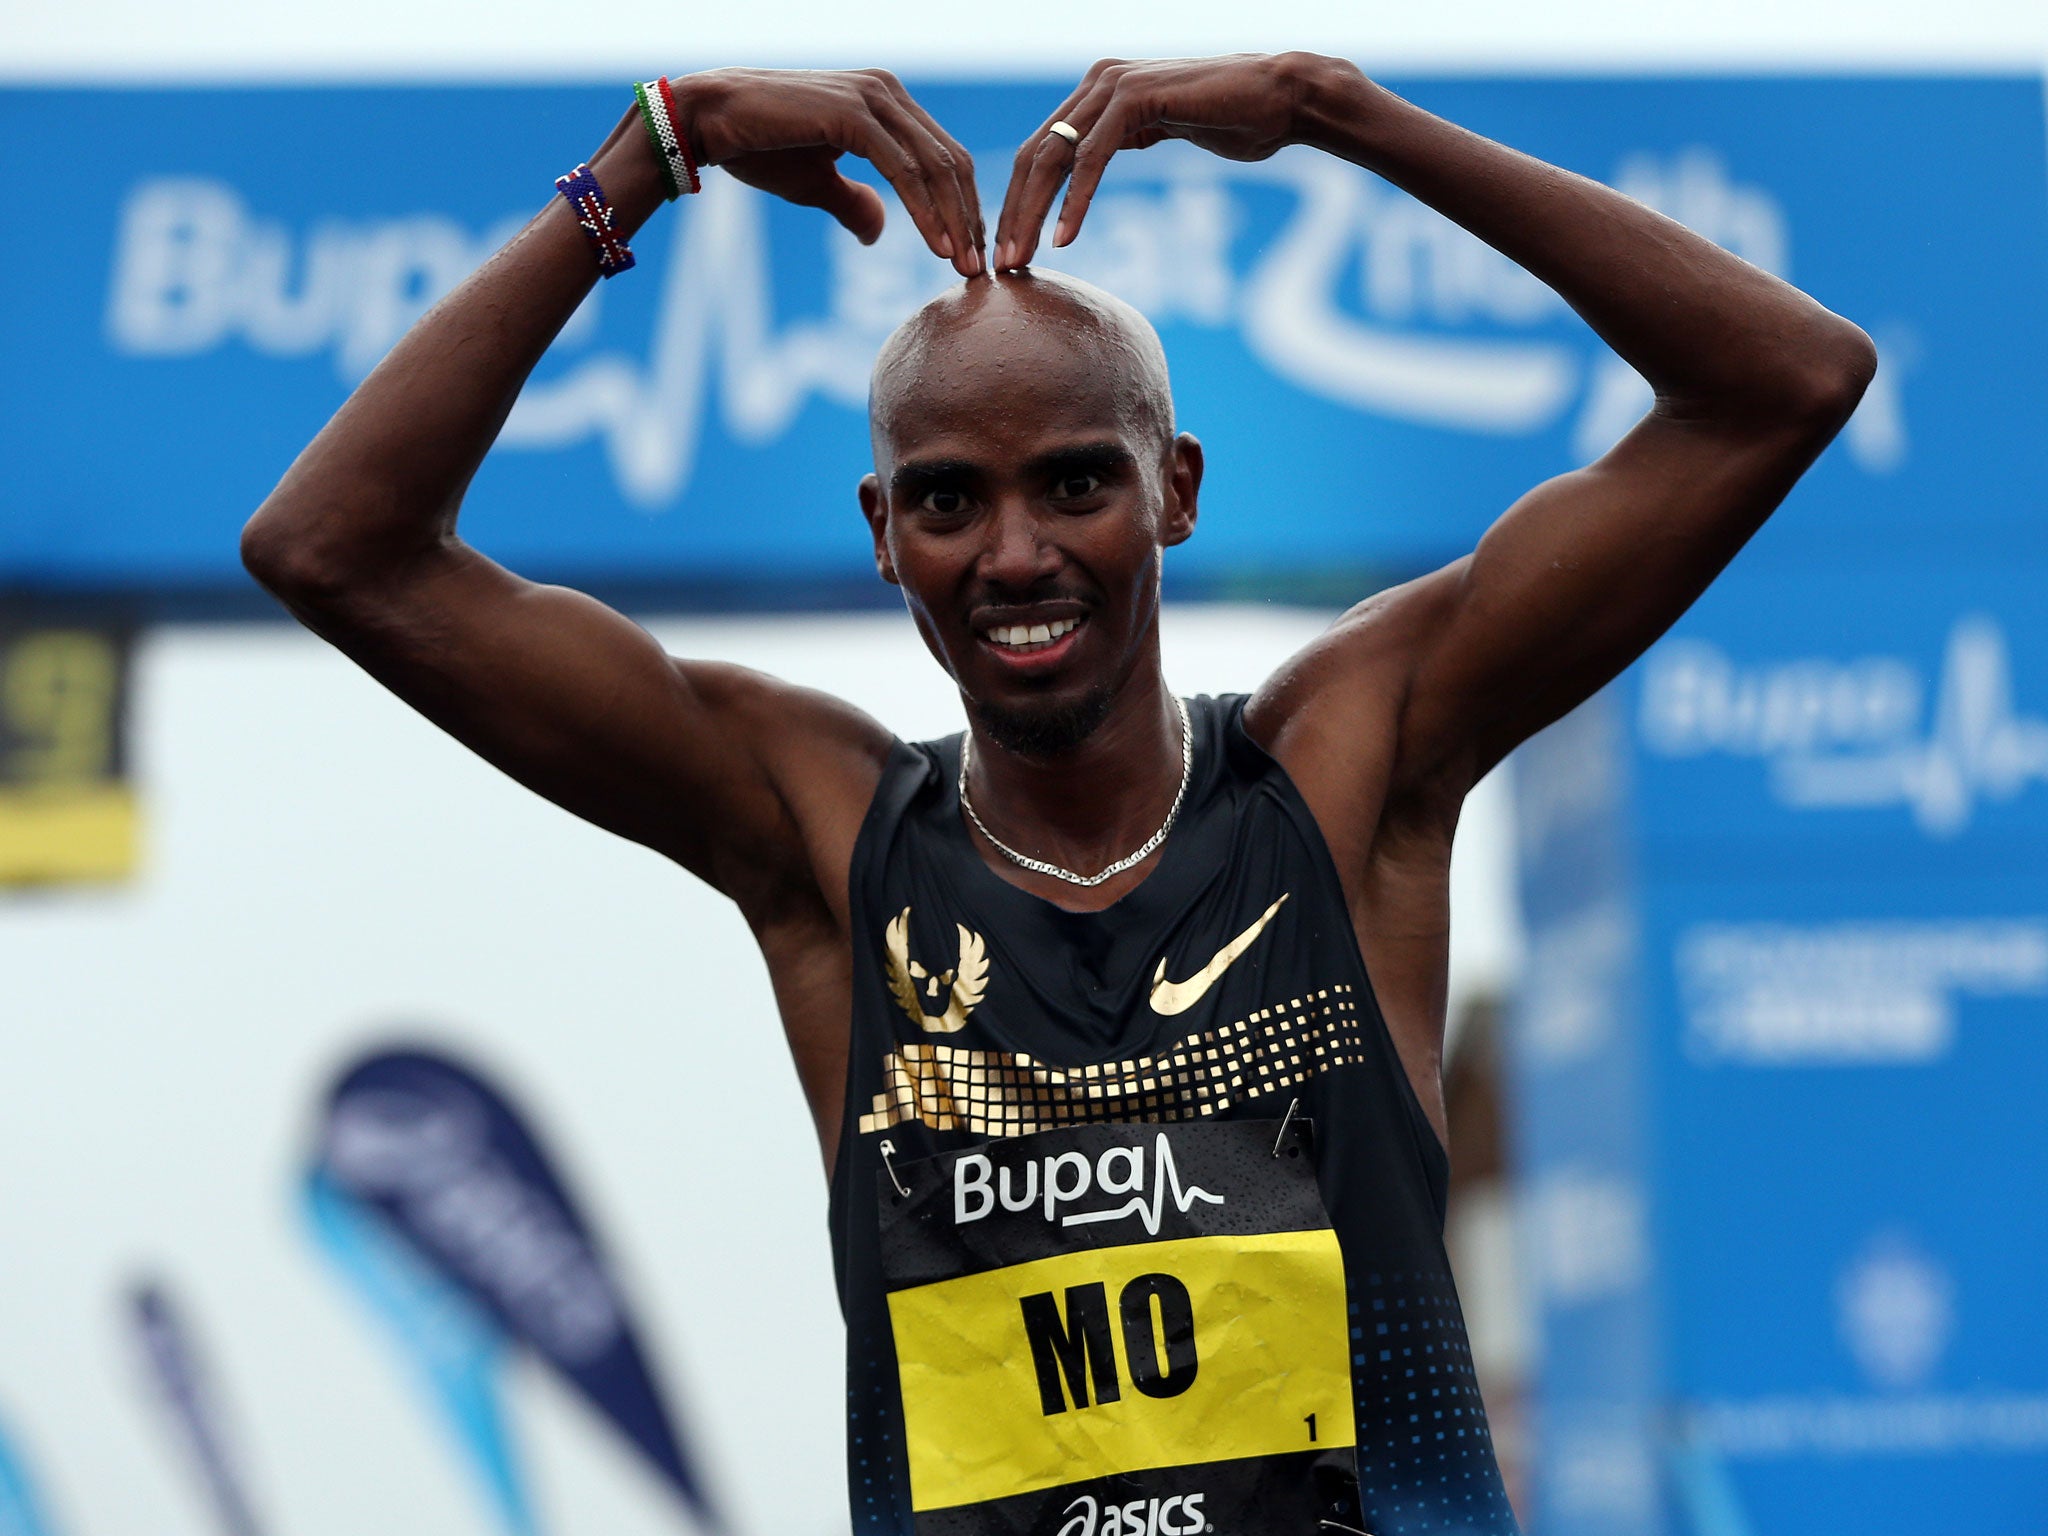 Mo Farah has admitted he could miss the 2014 Commonwelath Games to focus on the London Marathon